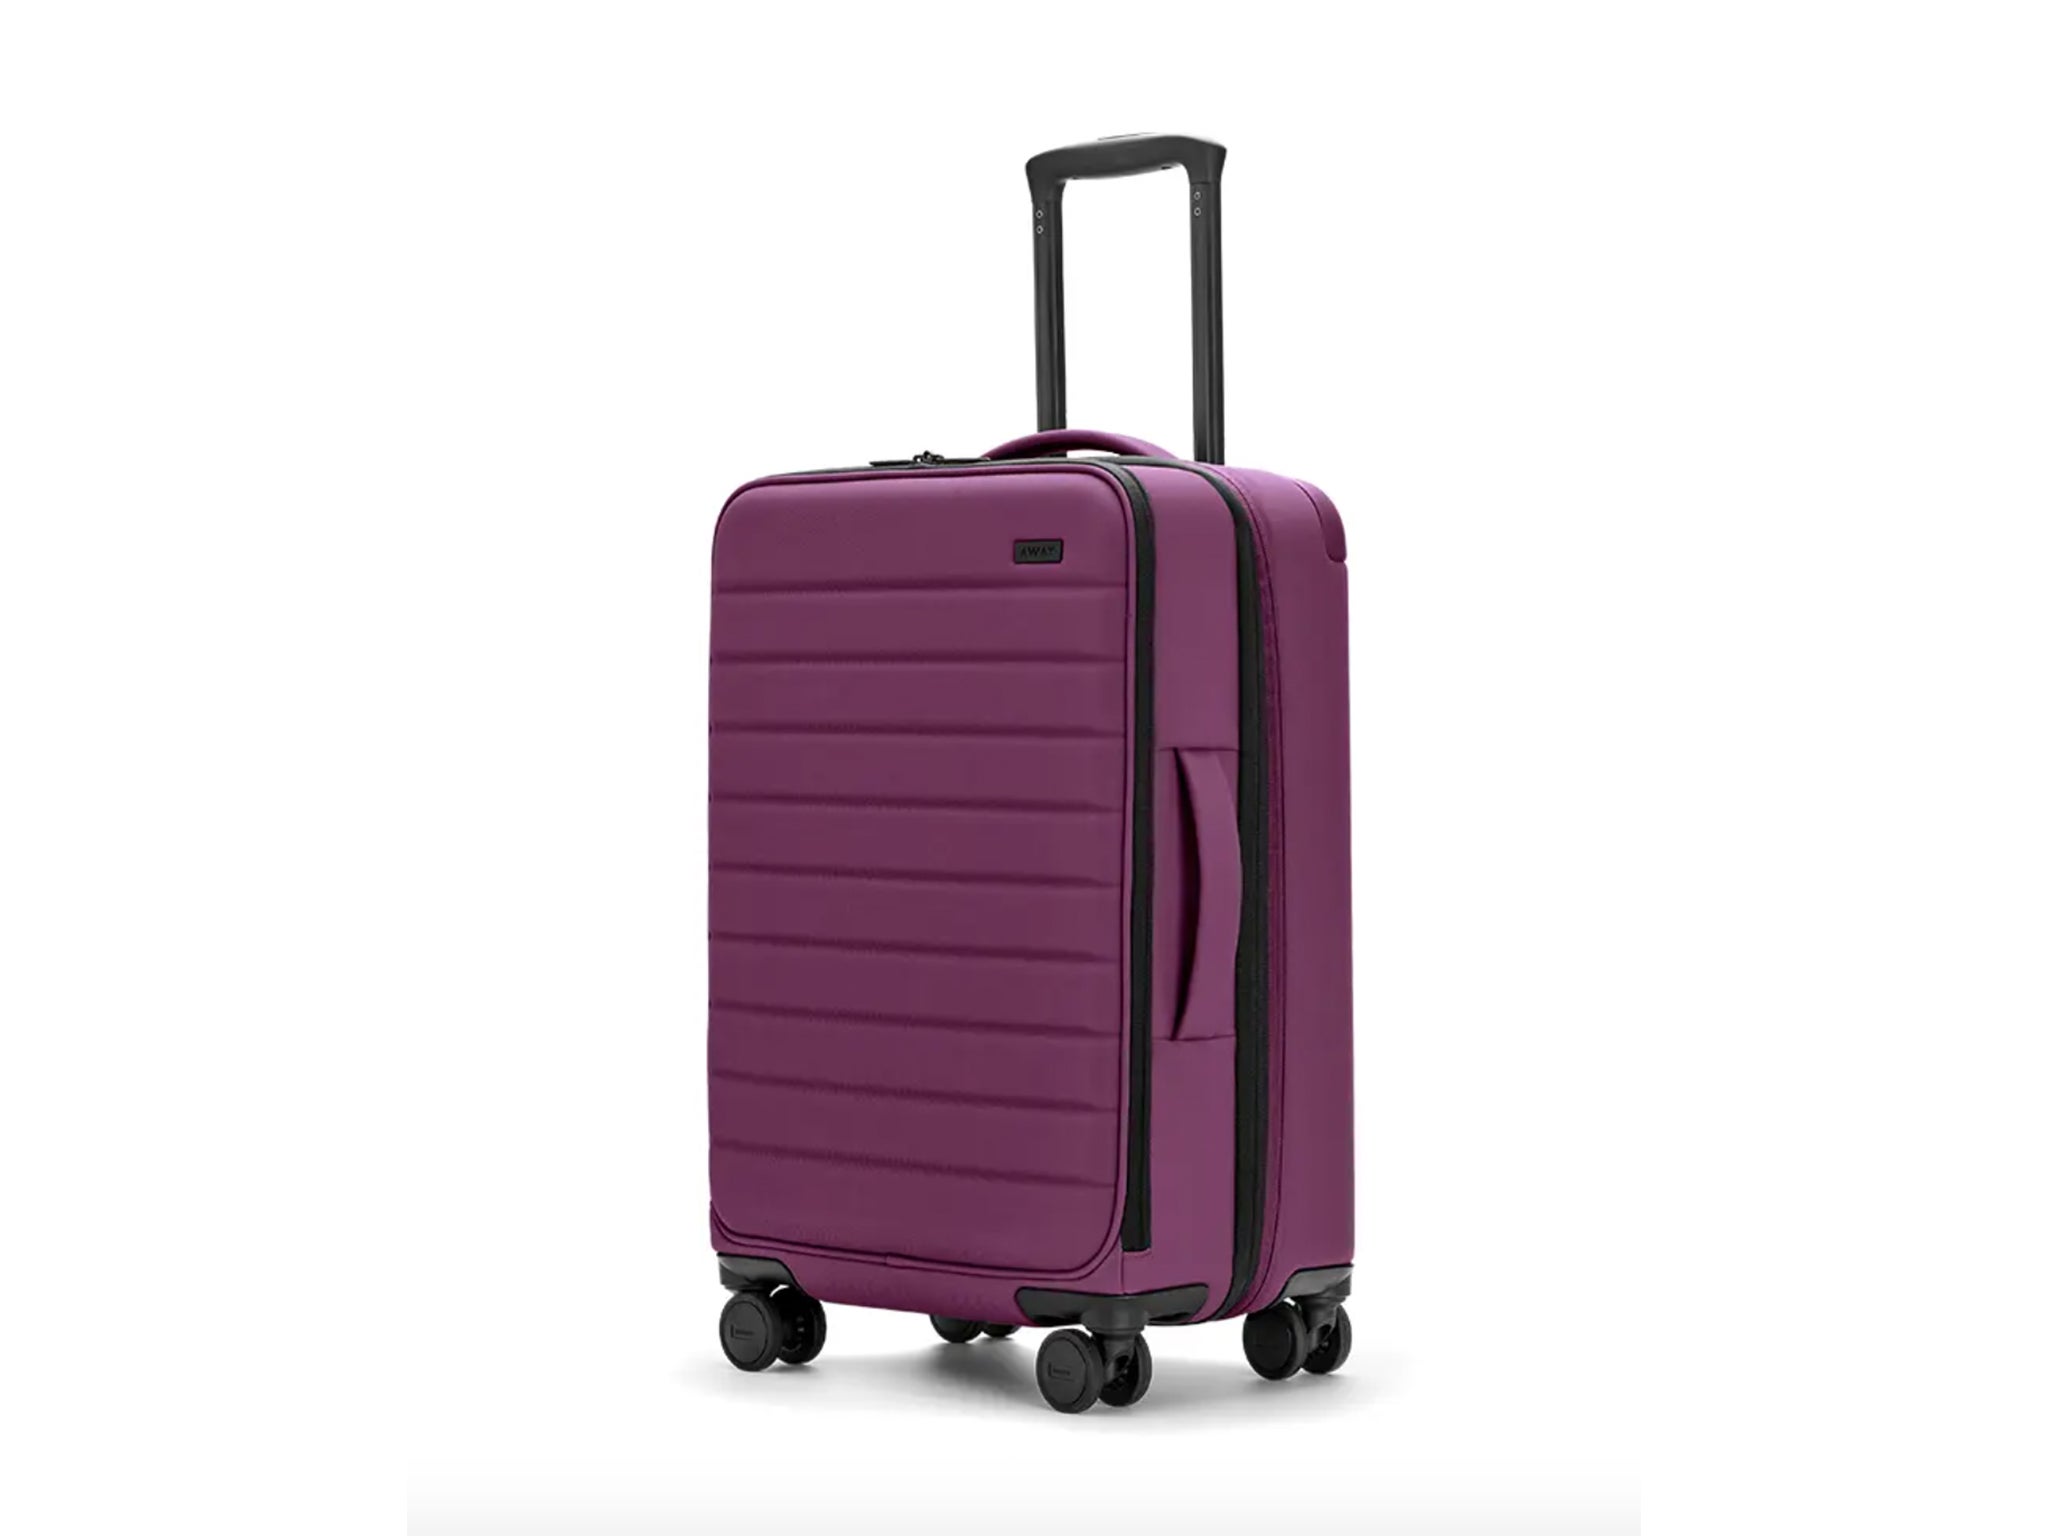 With room for eveything and then some, this expanding suitcase is ideal for a long weekend